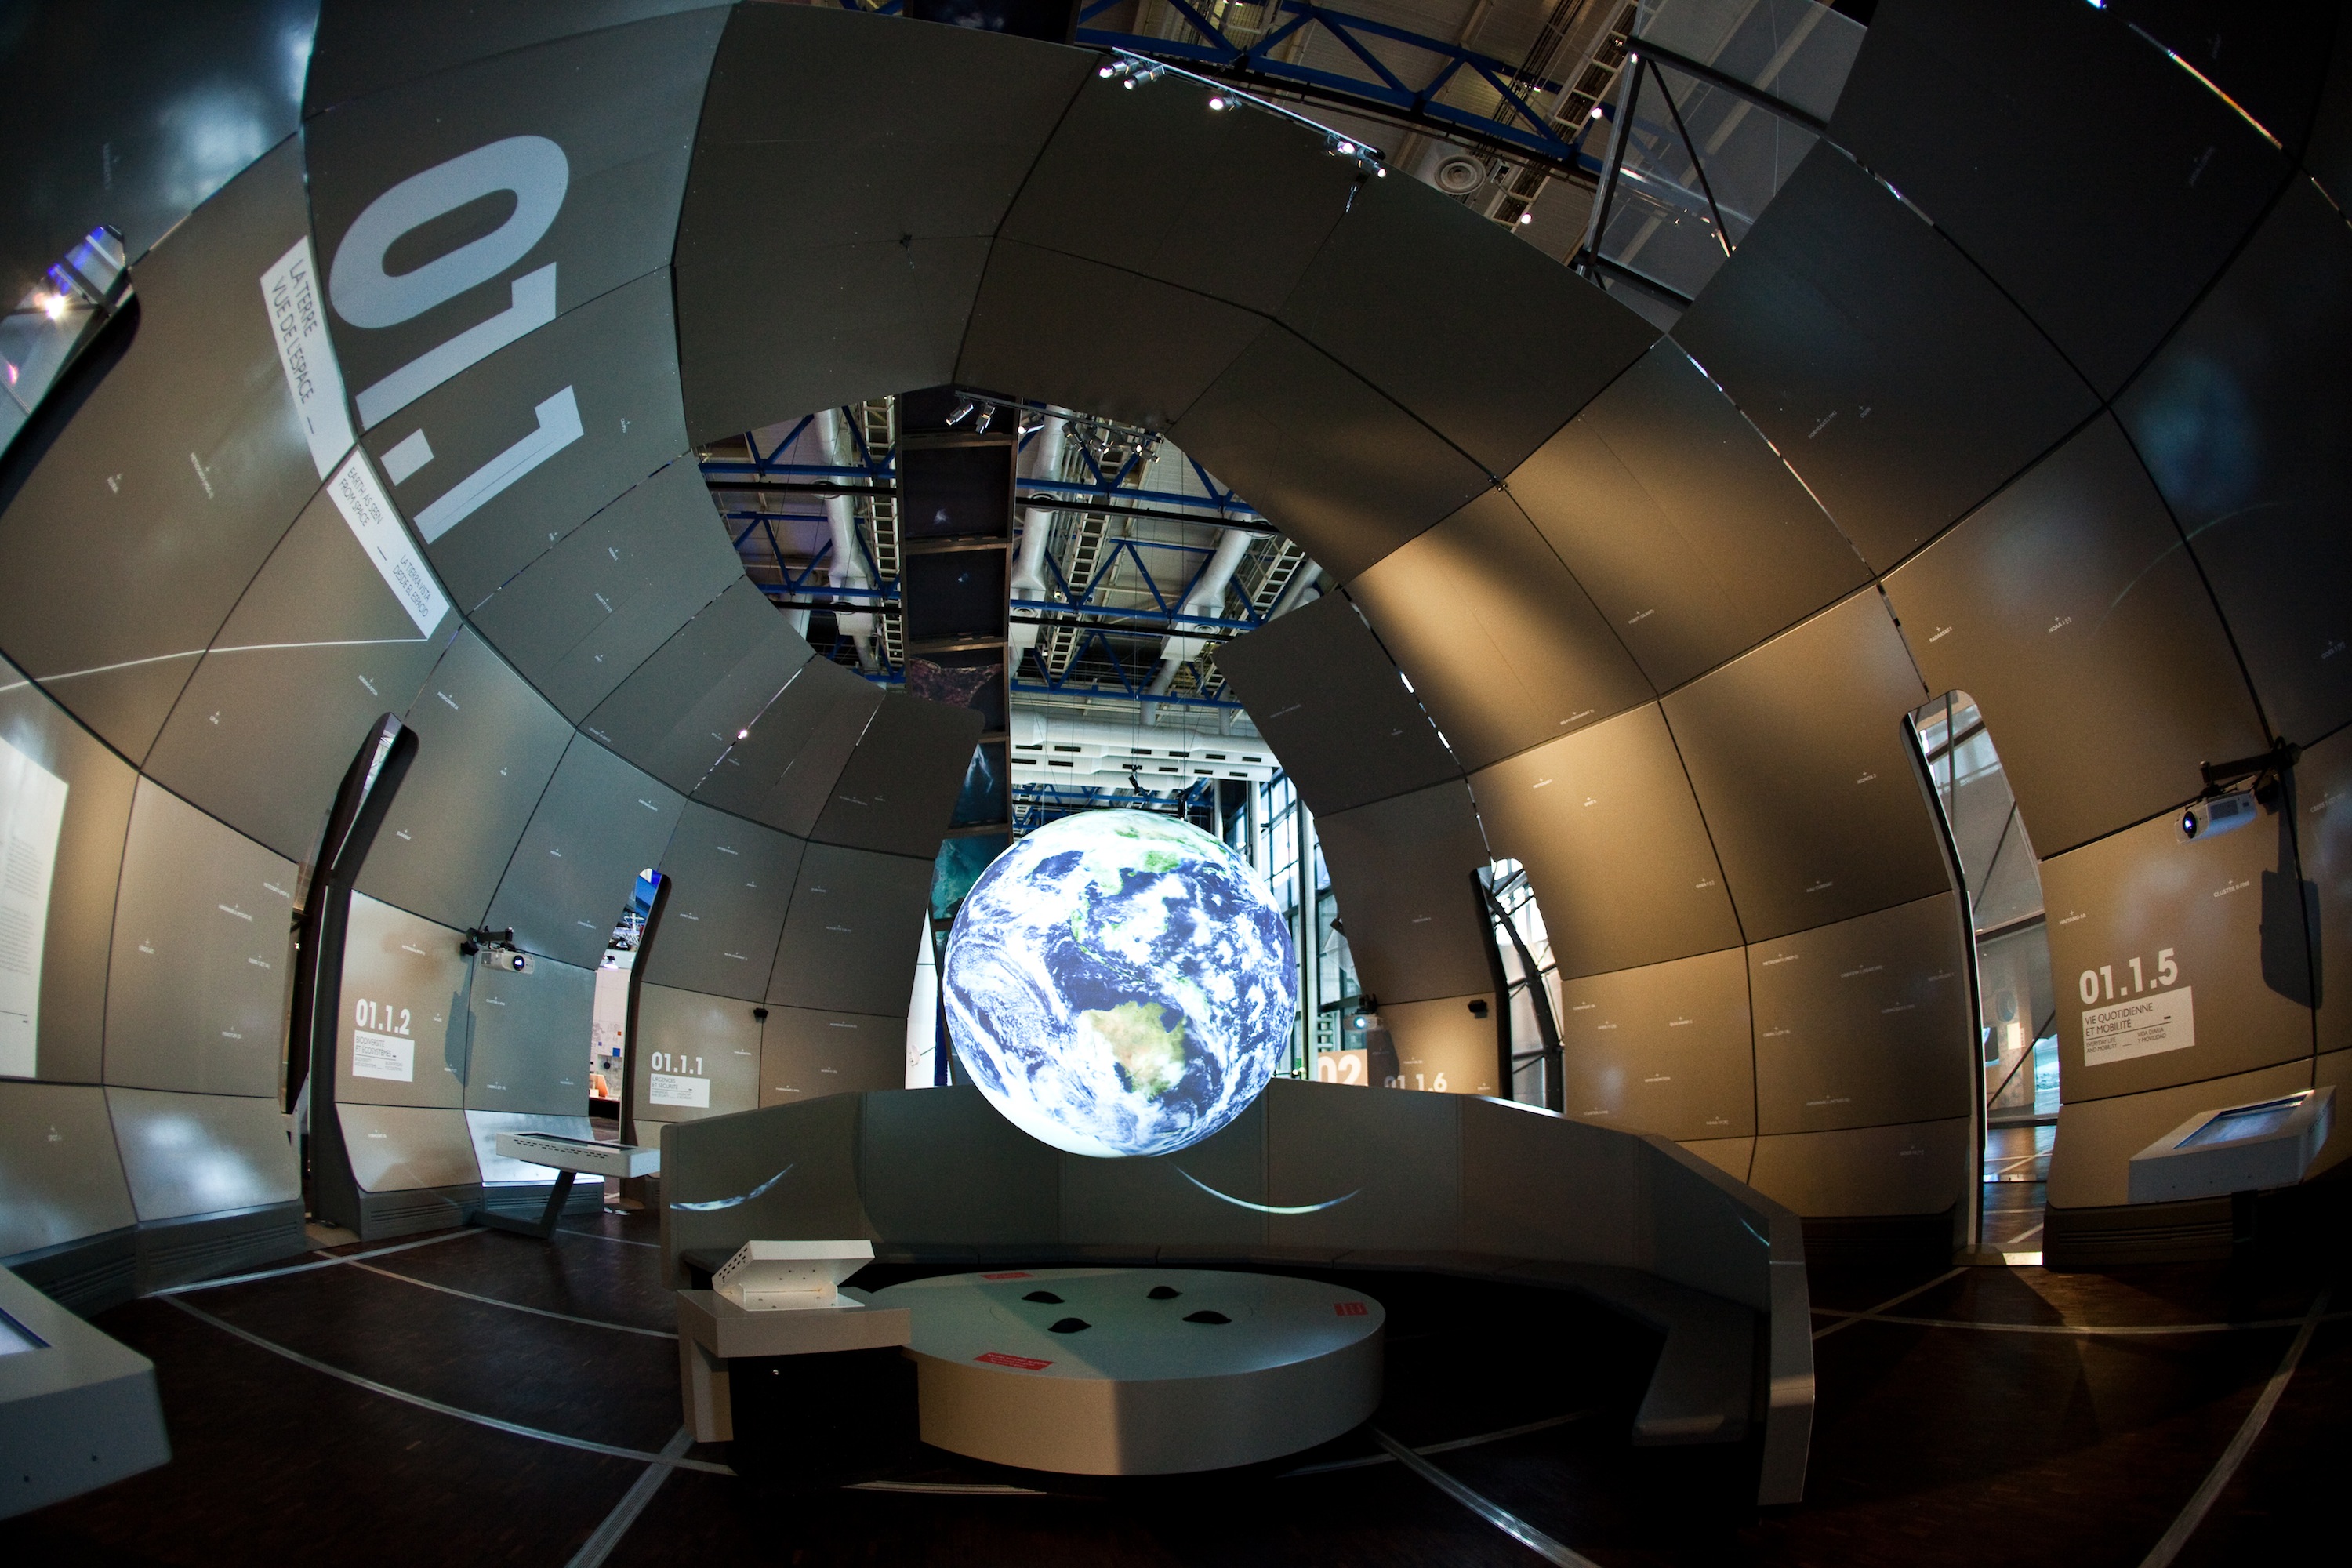 Science On a Sphere hangs from a domed ceiling constructed of individual panels displaying text. The dome is not fully enclosed, and through the gaps can be seen the ceiling of a larger room